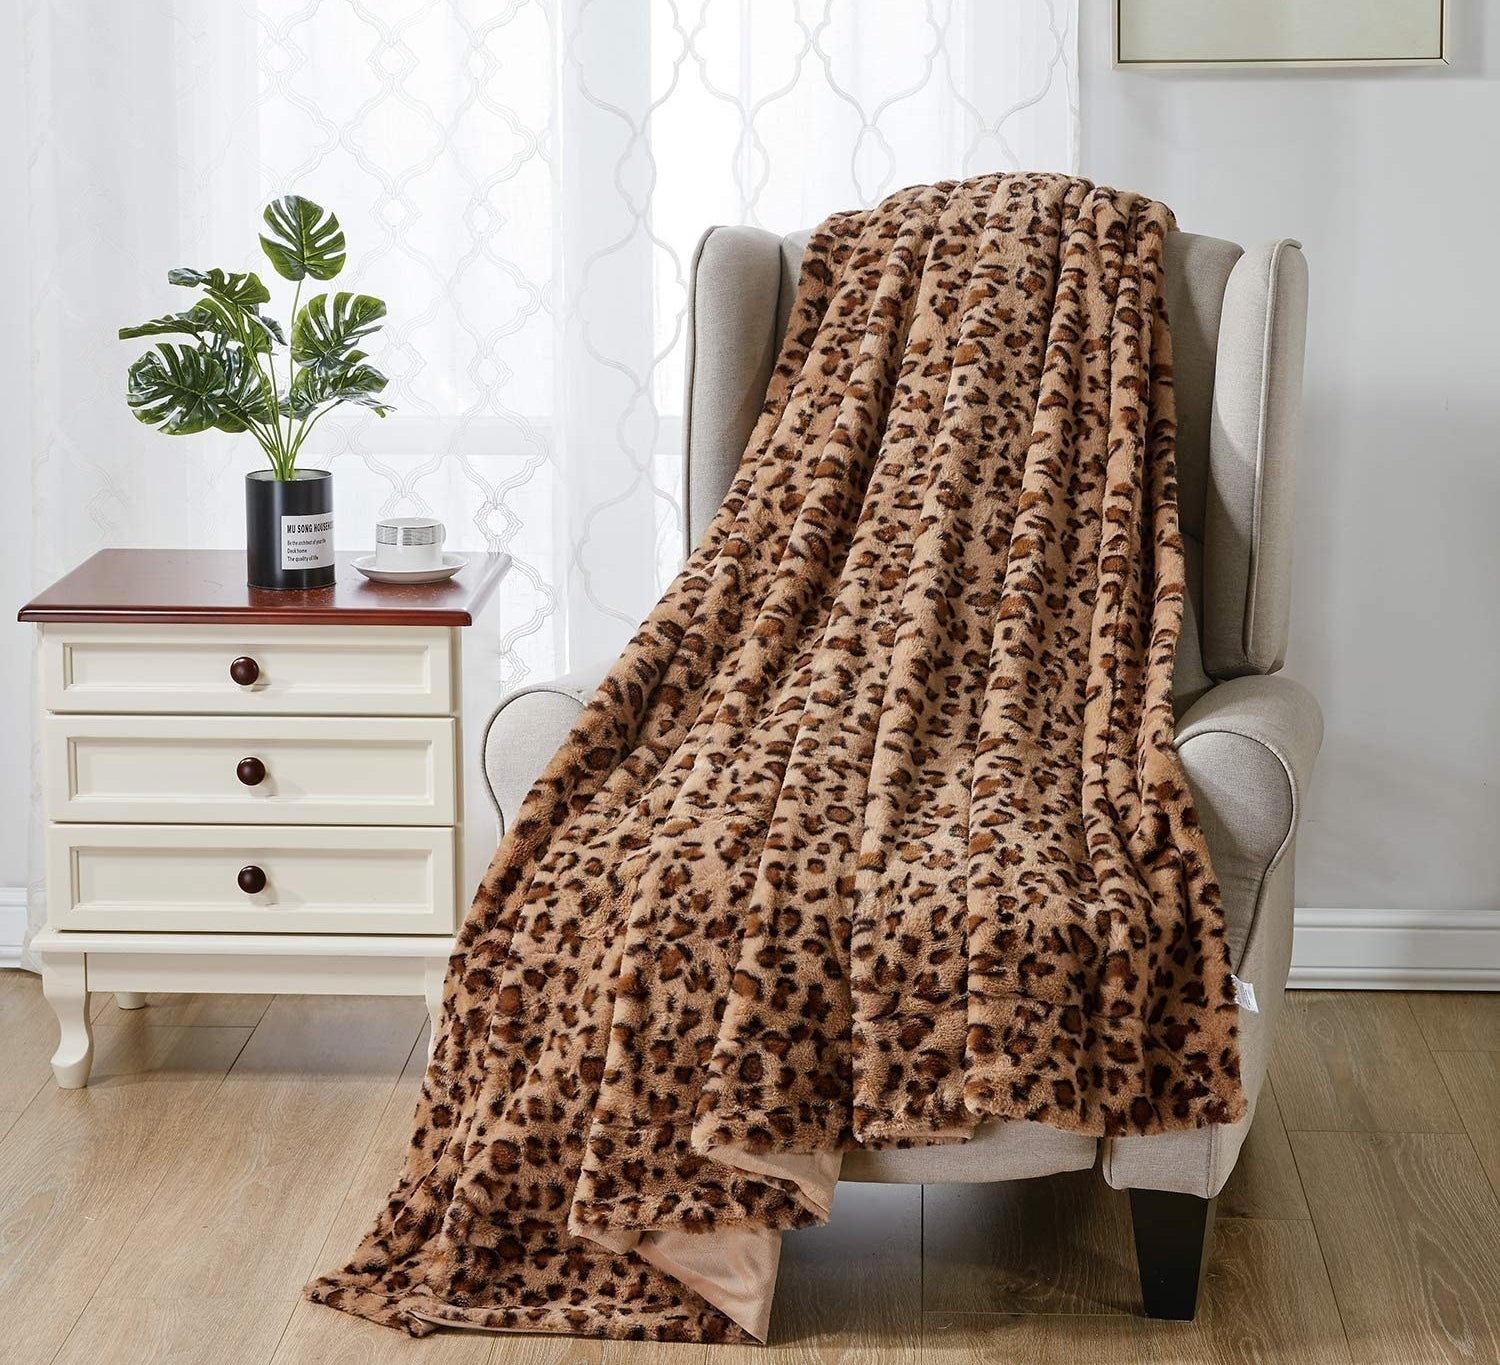 A leopard print blanket strewn over a cushioned chair next to a set of drawers that has a plant perched on top, for ambiance